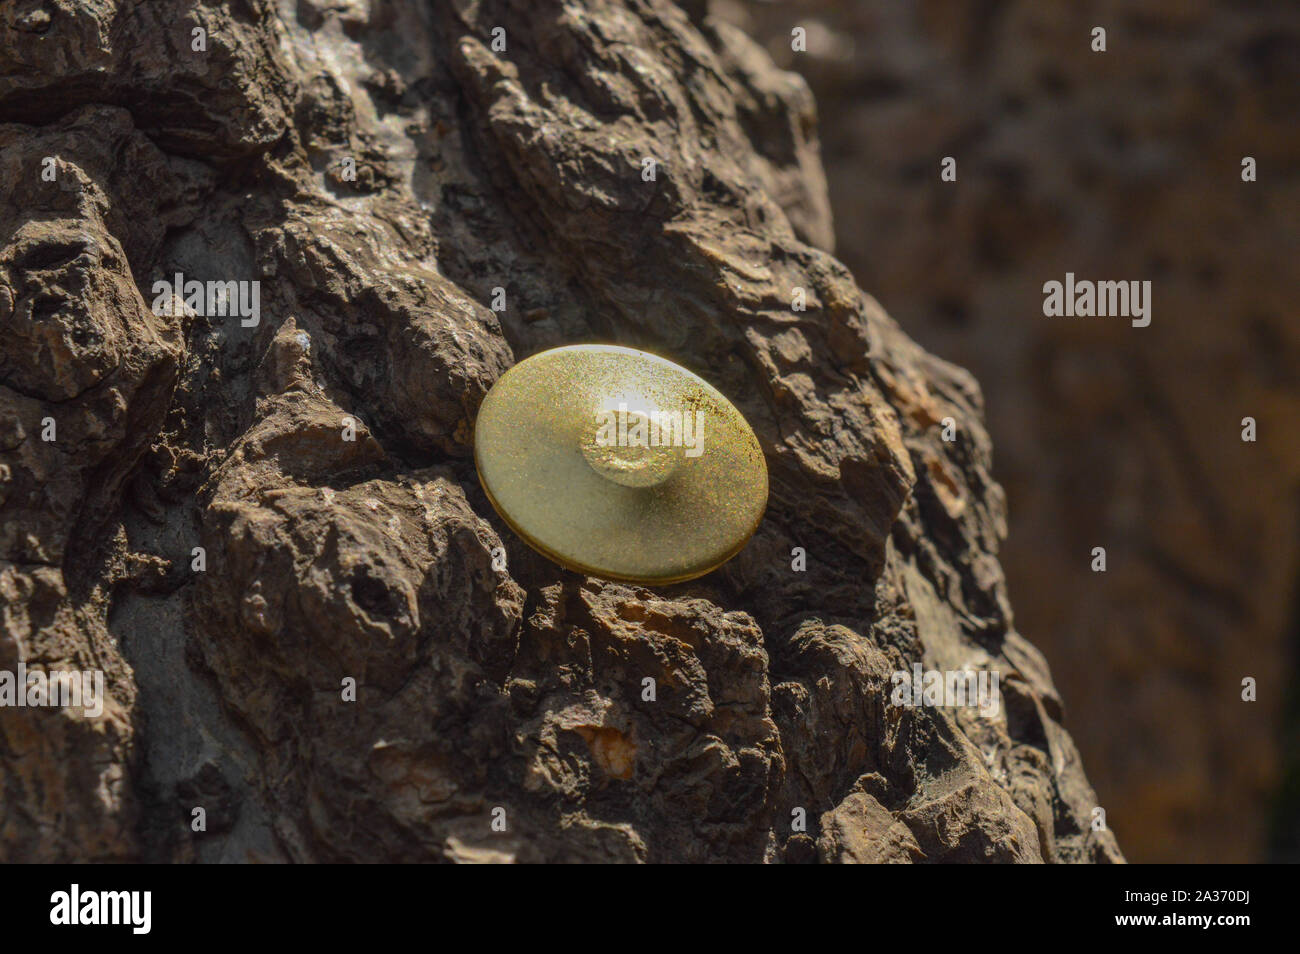 A golden push pin clipped on the tree. Stock Photo